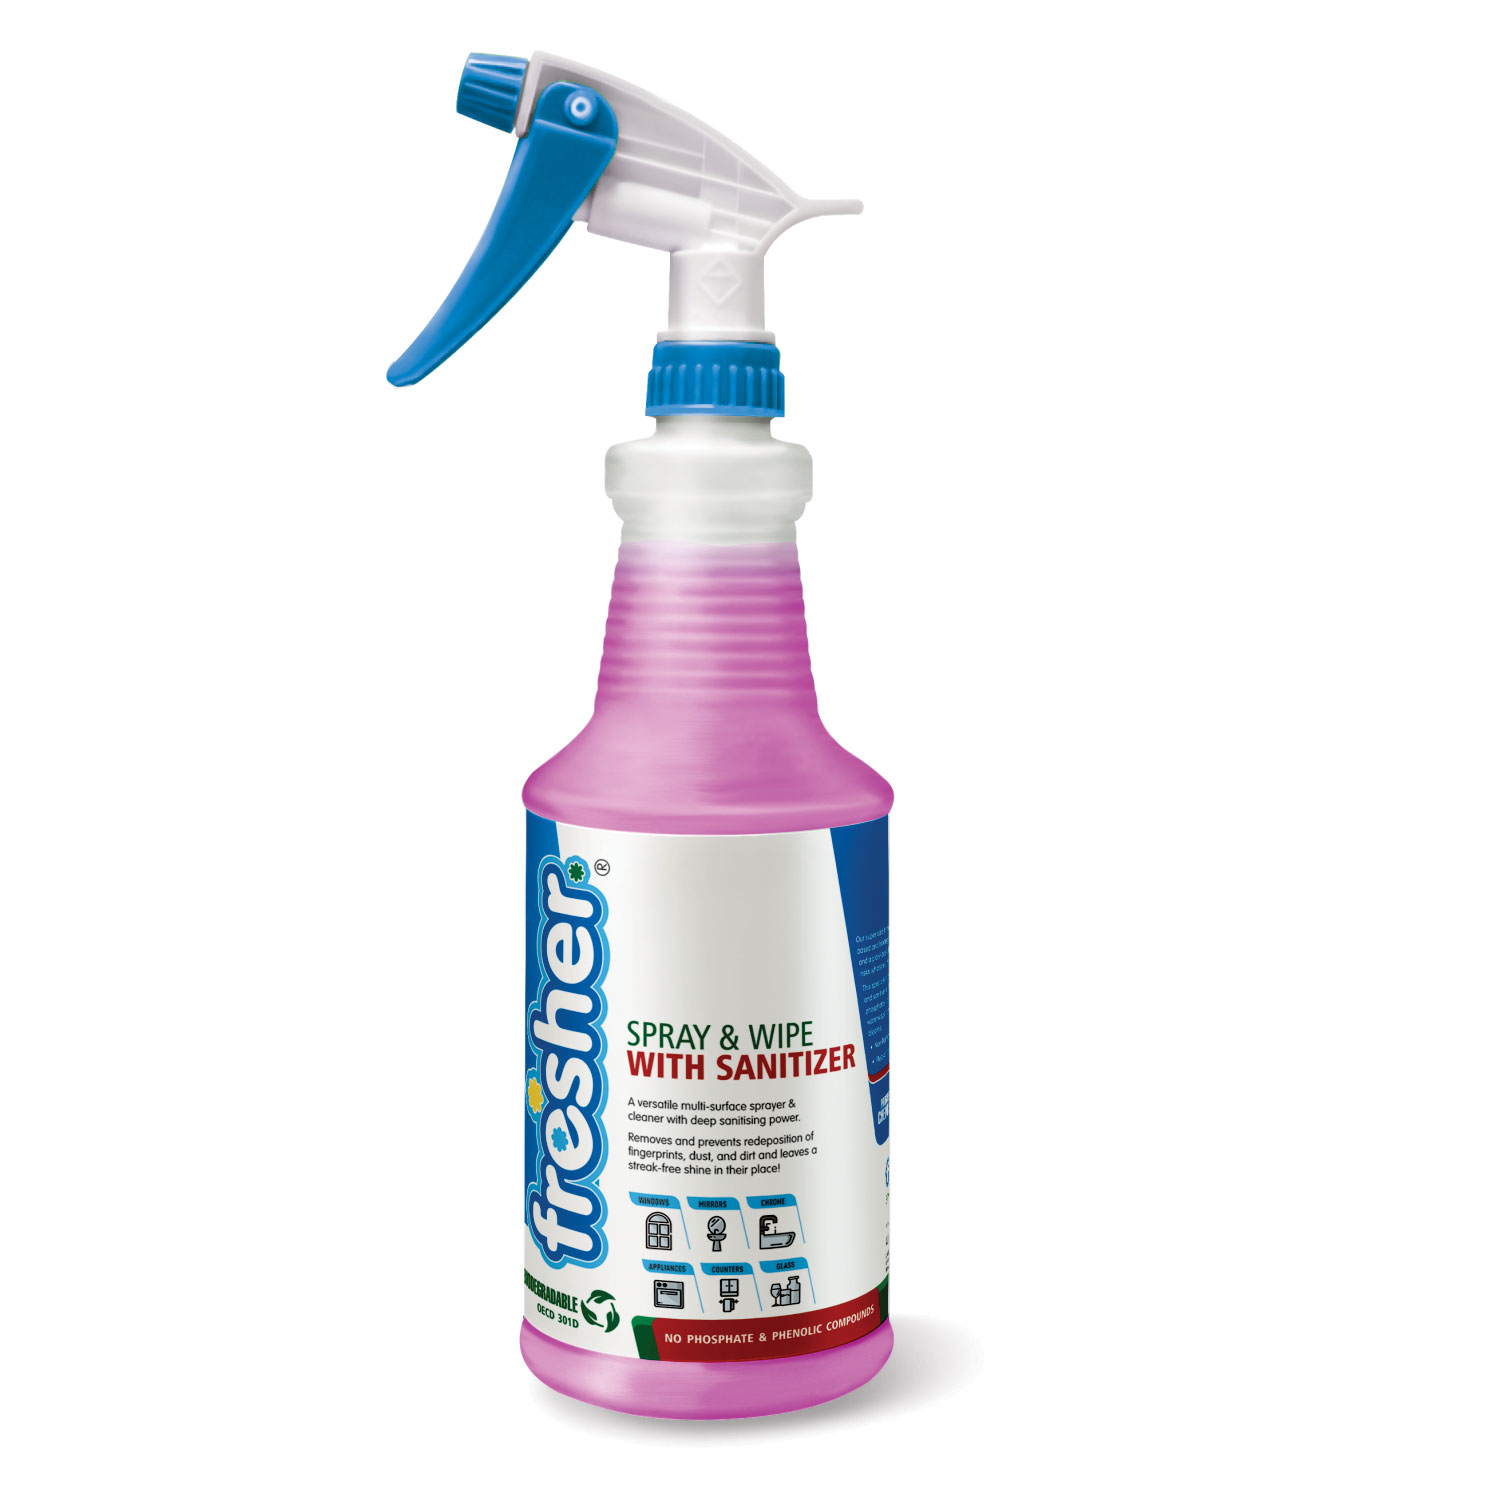 fresher-spray-and-wipe-with-sanitizer-300ml-pack